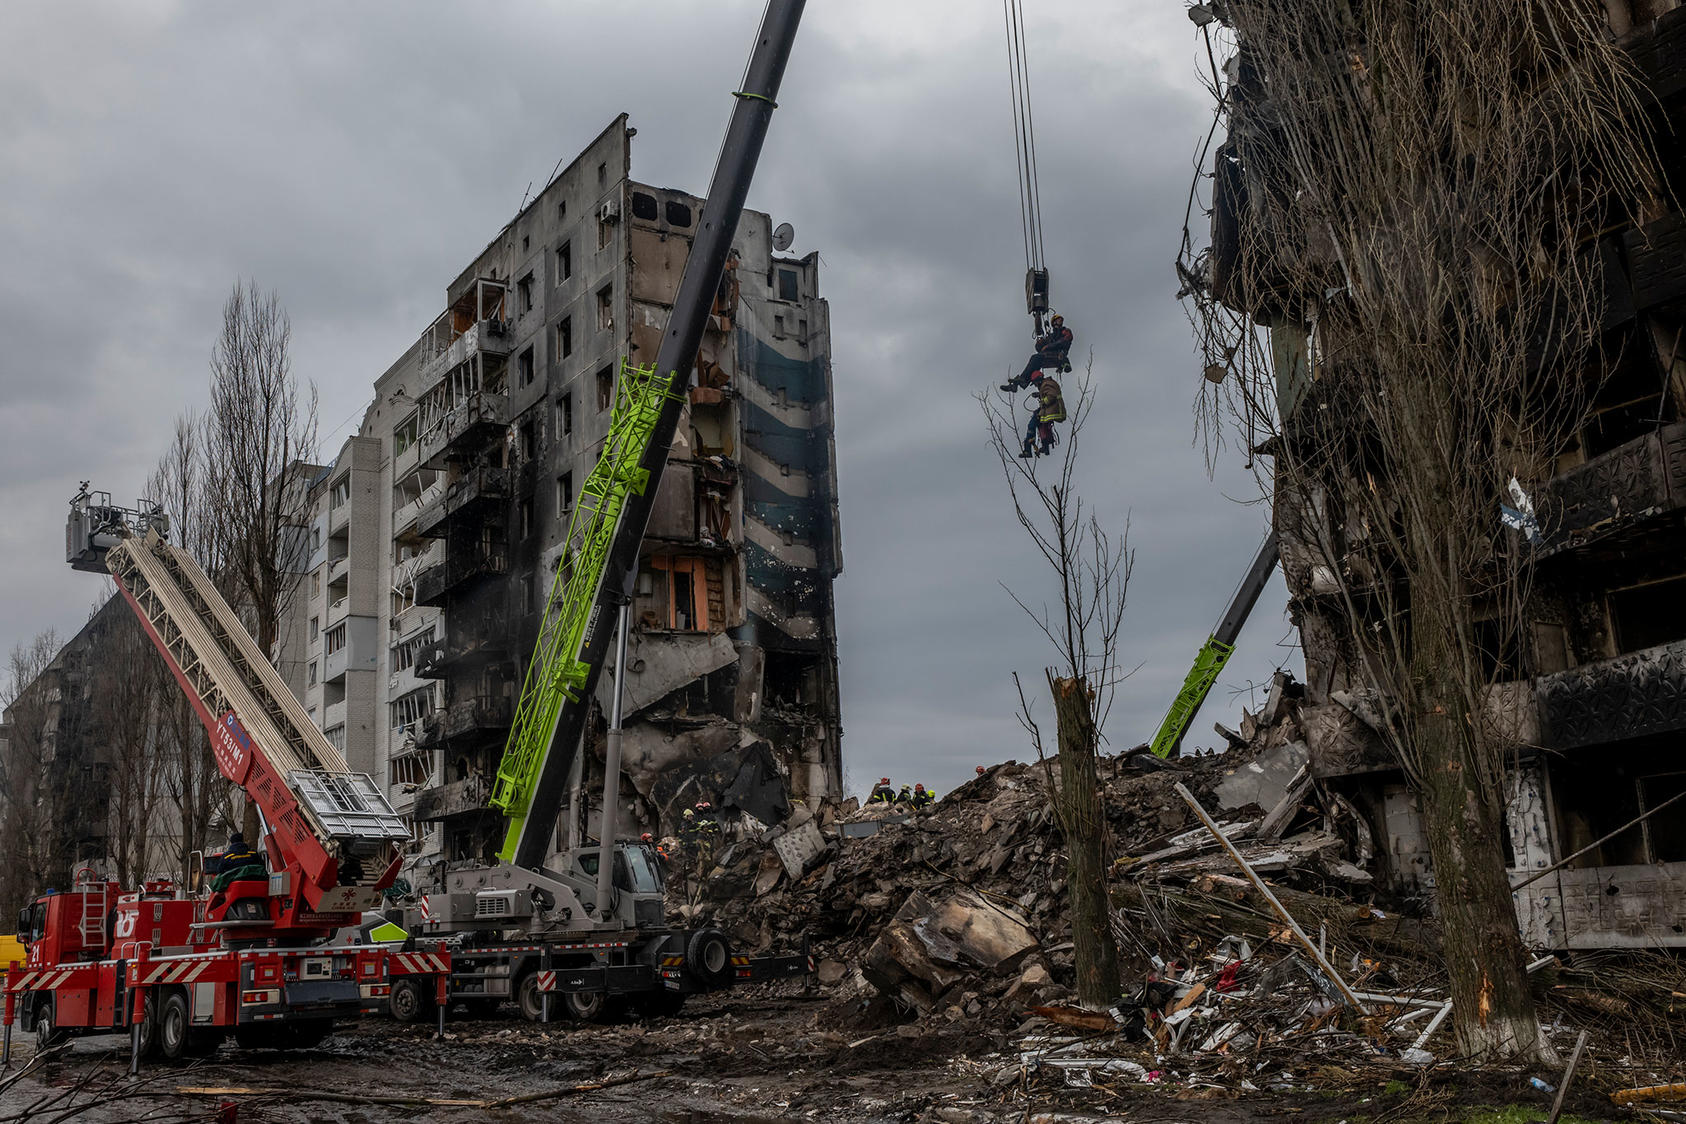 Rescue personnel use a crane to view inside the ruins of a bombed apartment building in Borodyanka, a town about 20 miles northwest of Kyiv, Ukraine on Saturday April 9, 2022. (Daniel Berehulak/The New York Times)